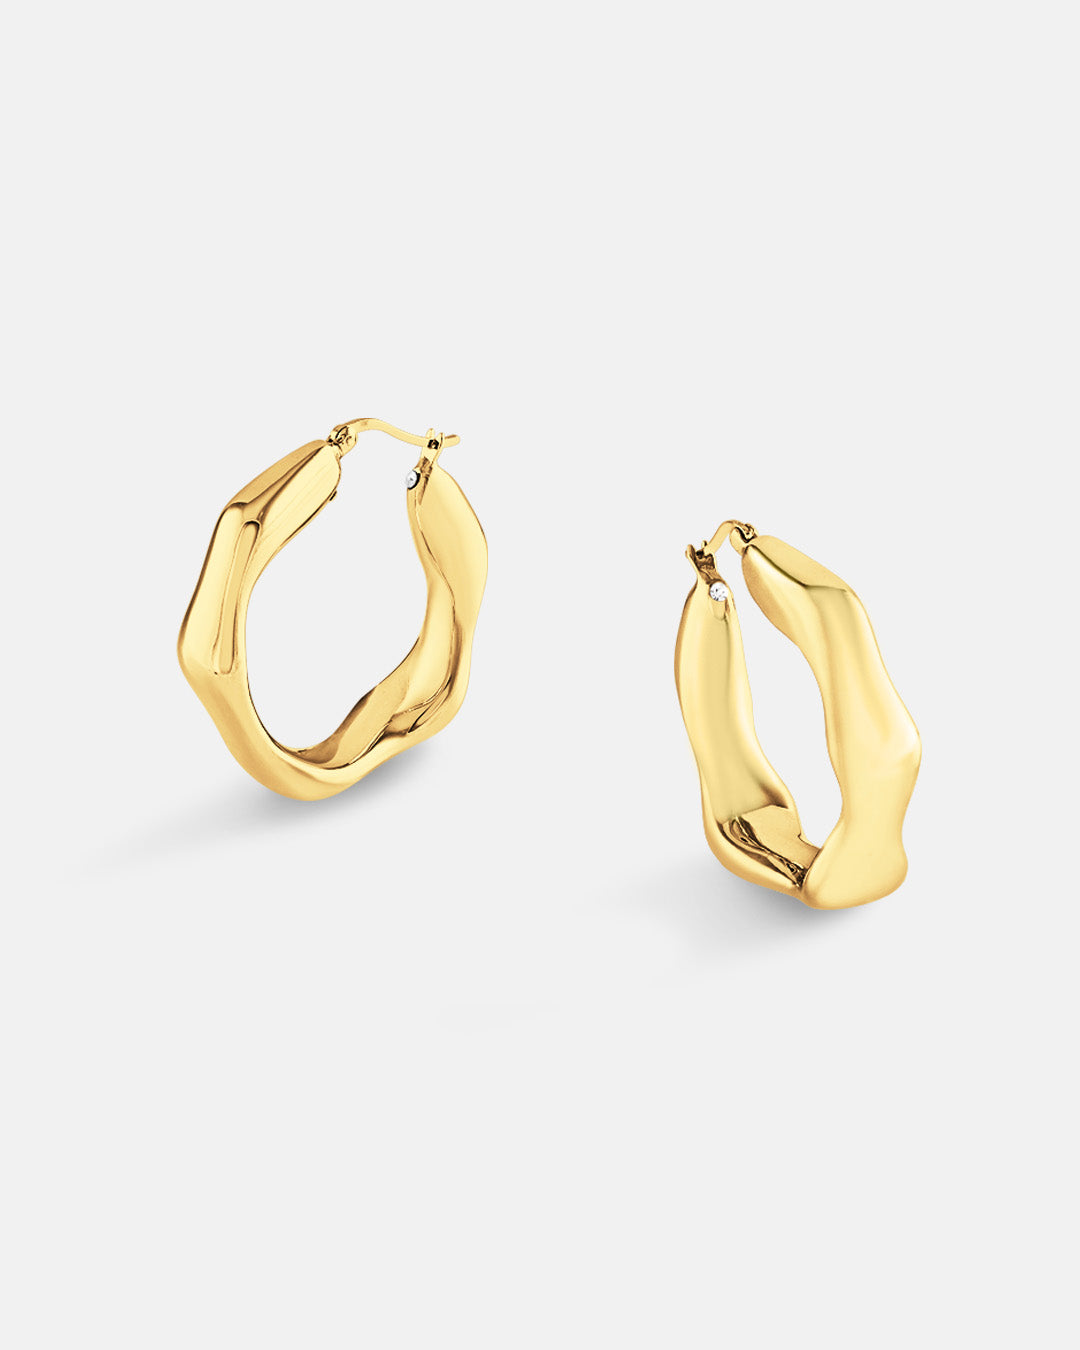 This is the product picture of heptagon shape hoop earrings plated in gold in sterling silver material